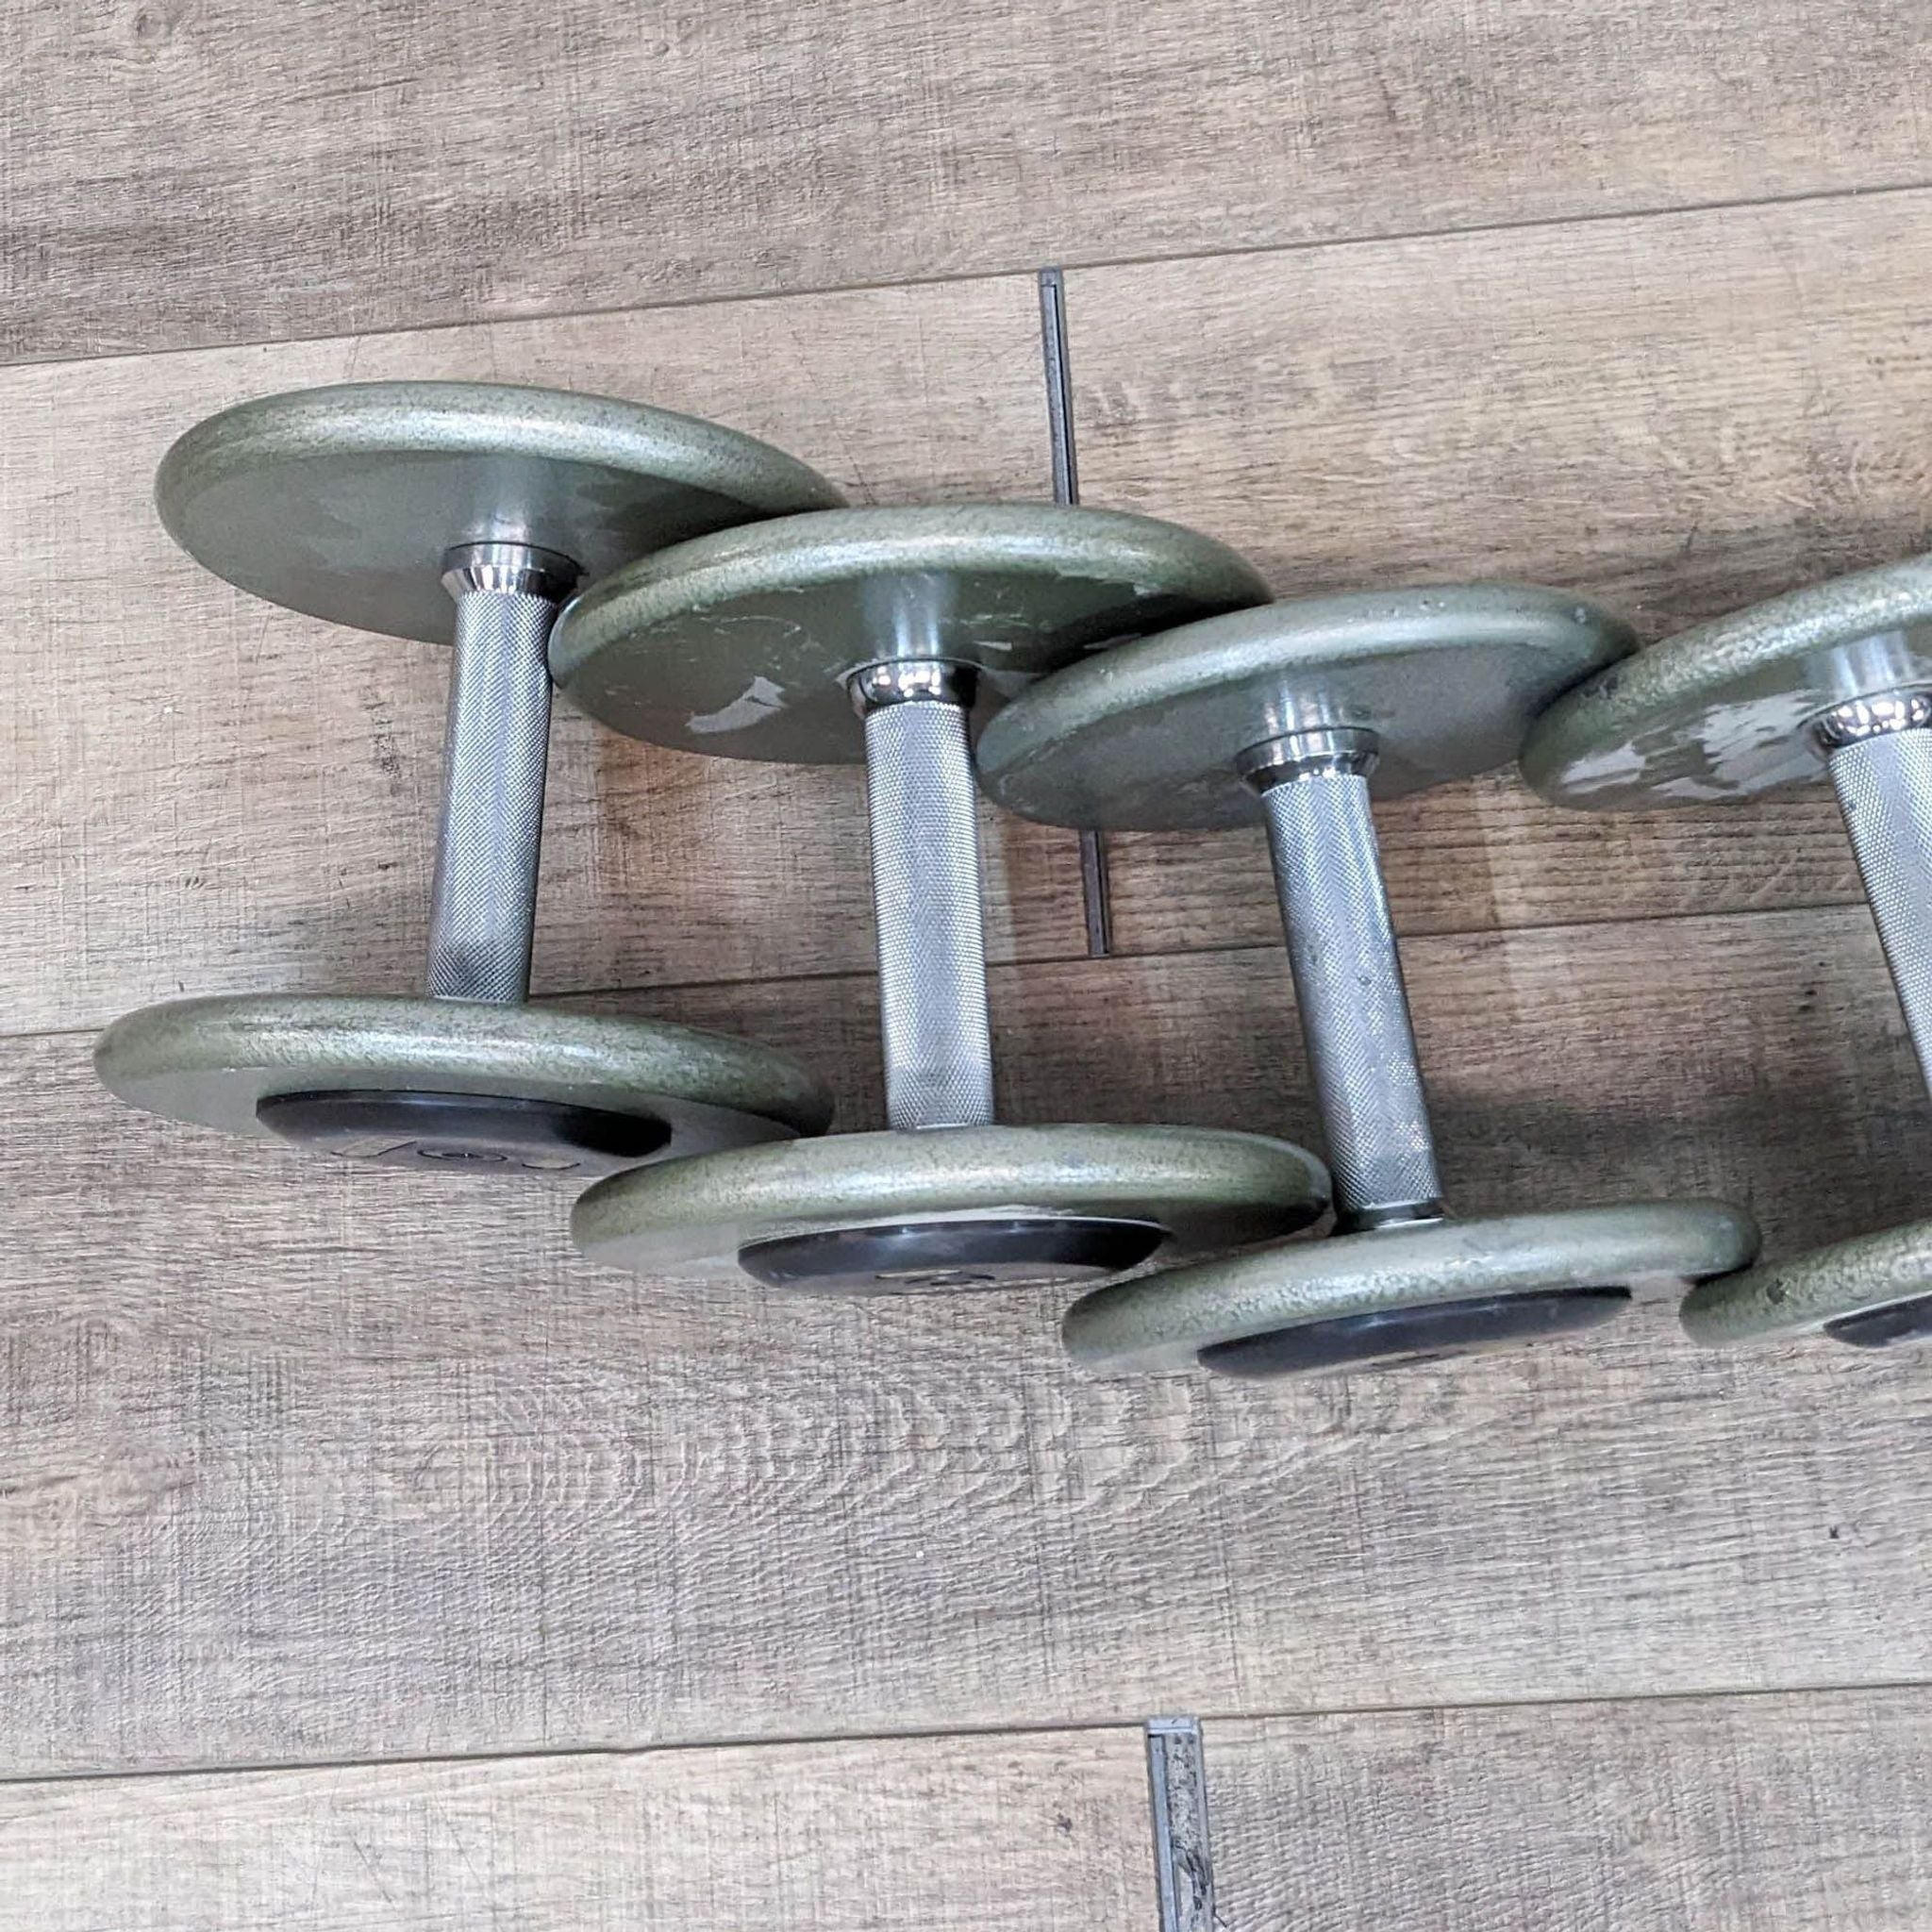 Three Ivanko dumbbells with metal handles and green plates on a wooden floor.